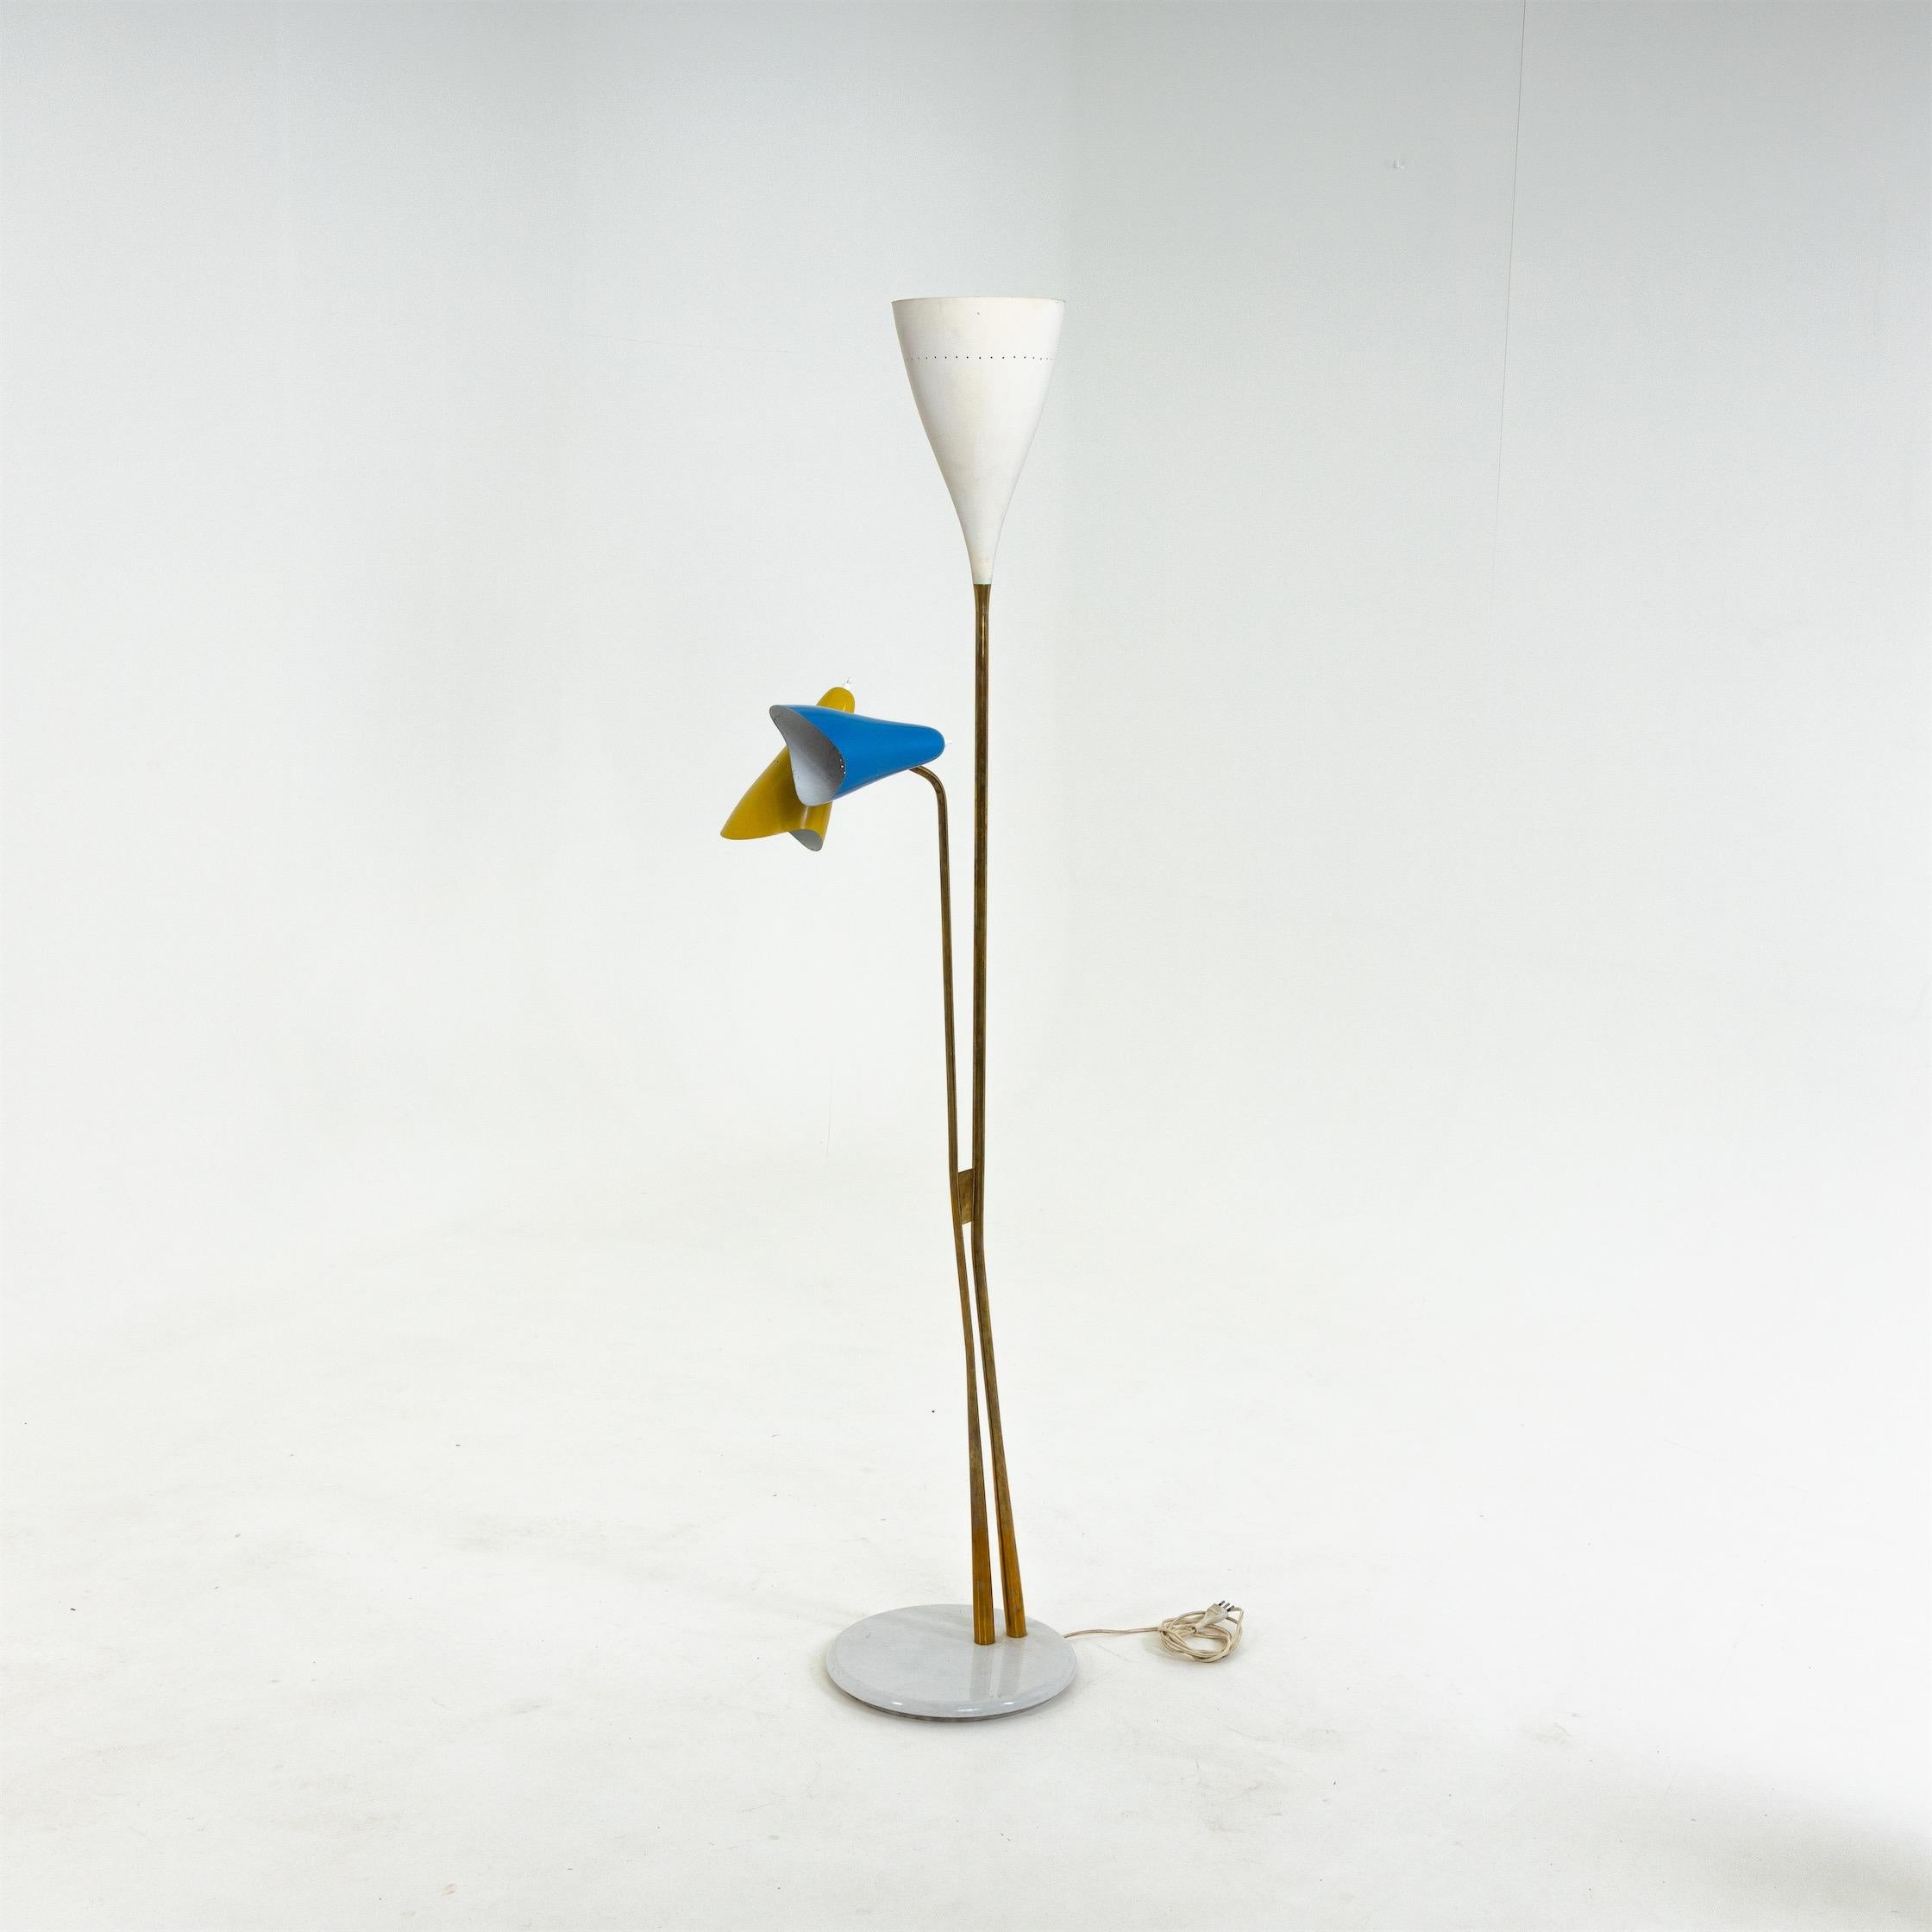 Lamp standing on a round marble base with brass stem and conical lampshades in white, blue and yellow.